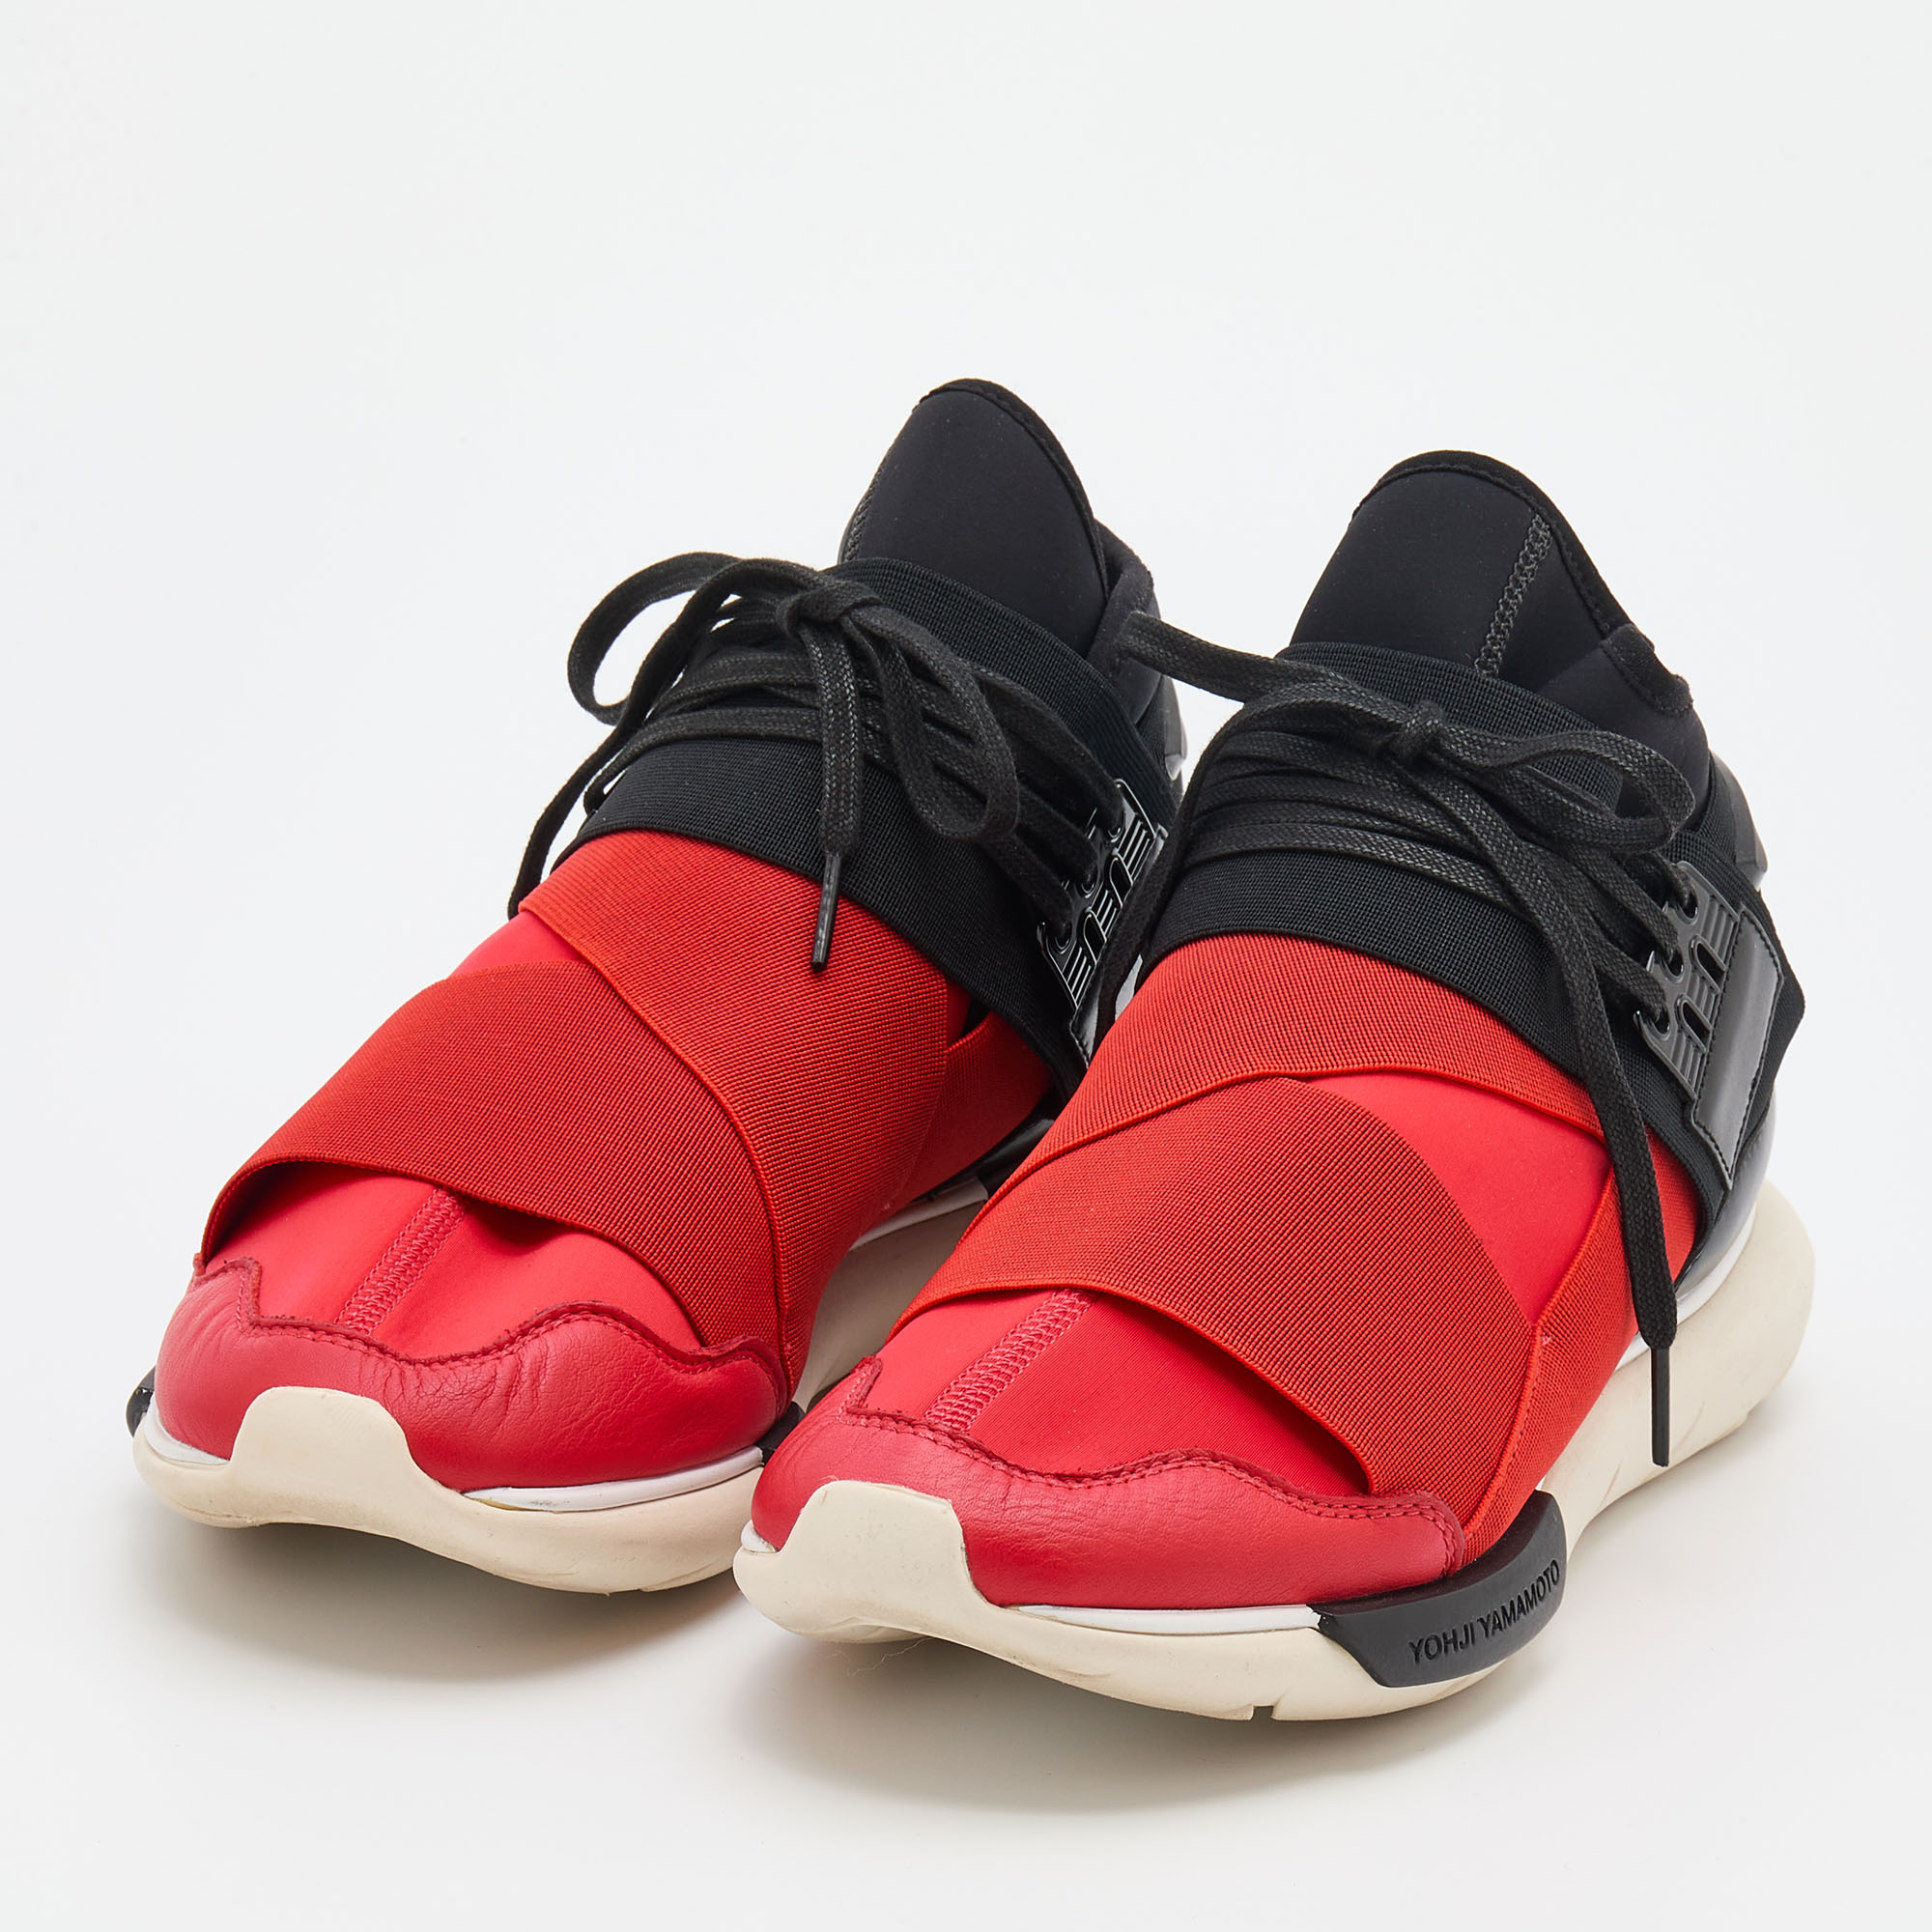 

Adidas Y-3 Red/Black Neoprene And Leather Qasa High Top Sneakers Size